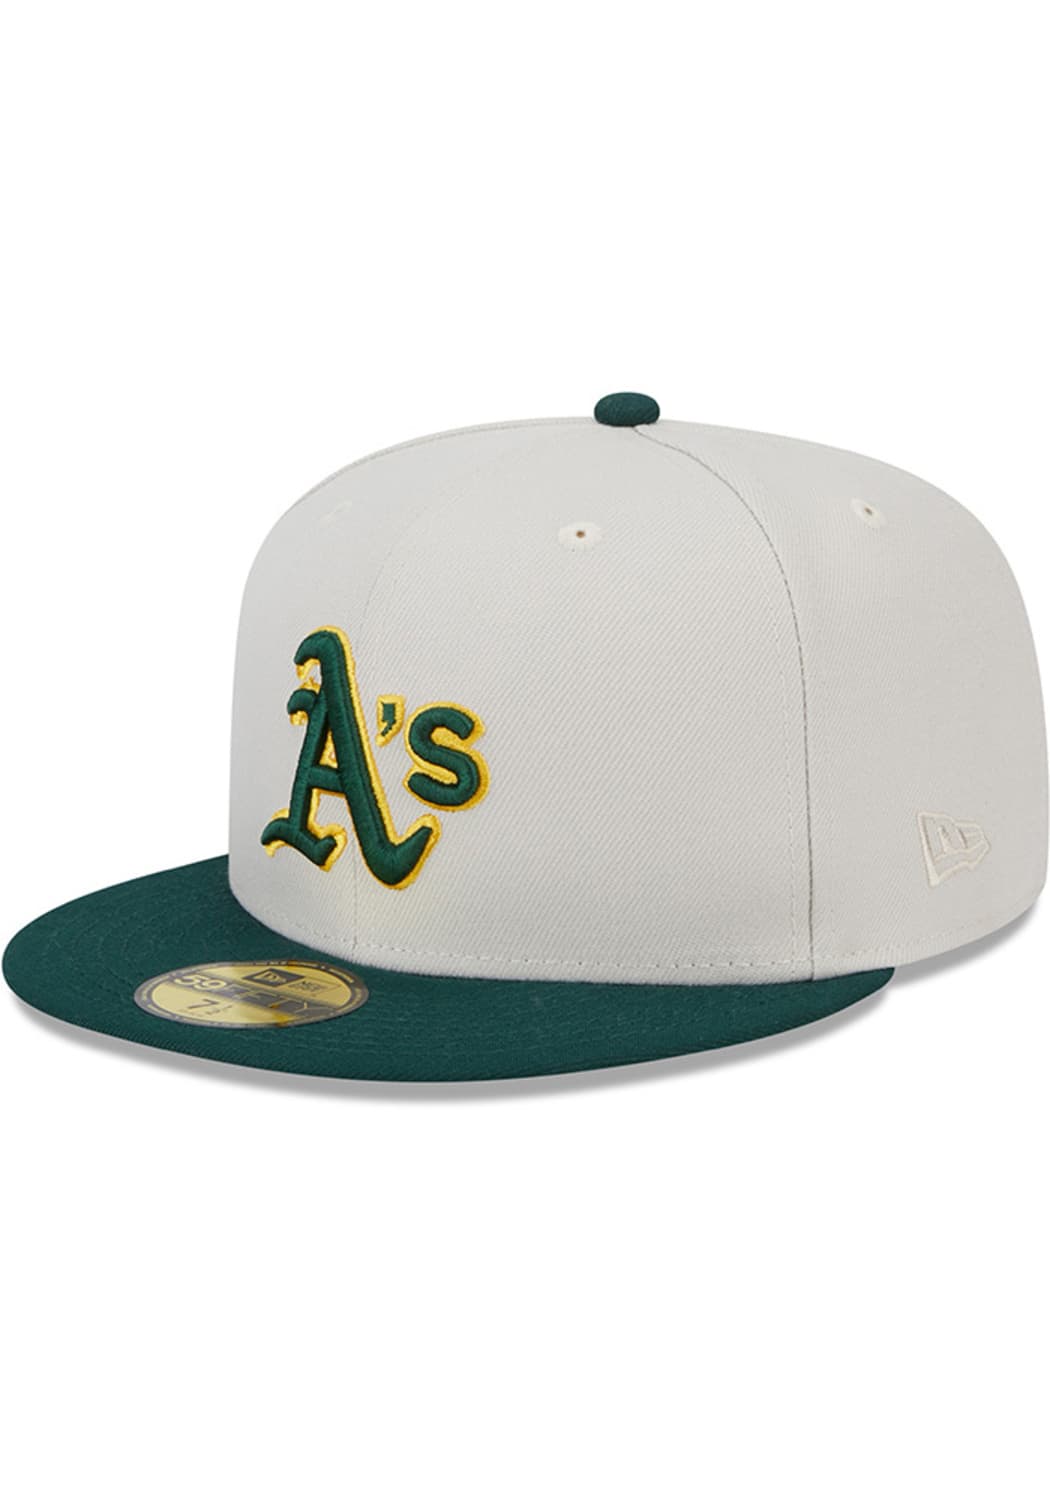 New Era MLB Oakland Athletics Men's White World Class 59Fifty Fitted Hat